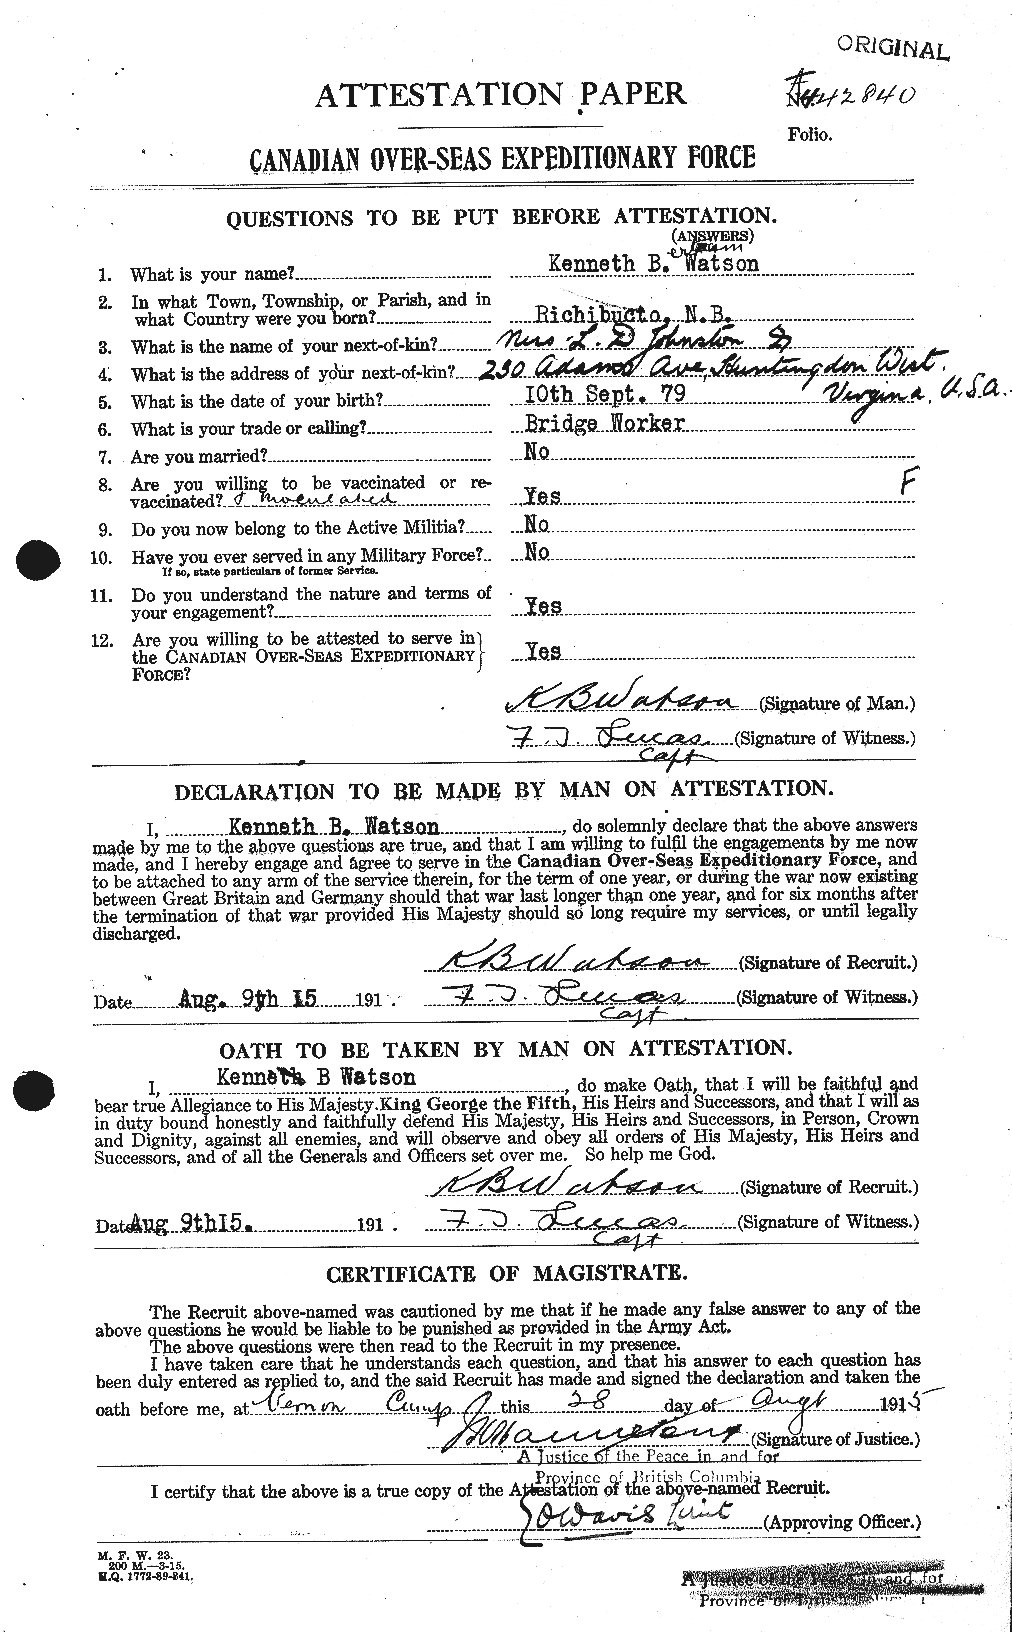 Personnel Records of the First World War - CEF 661080a